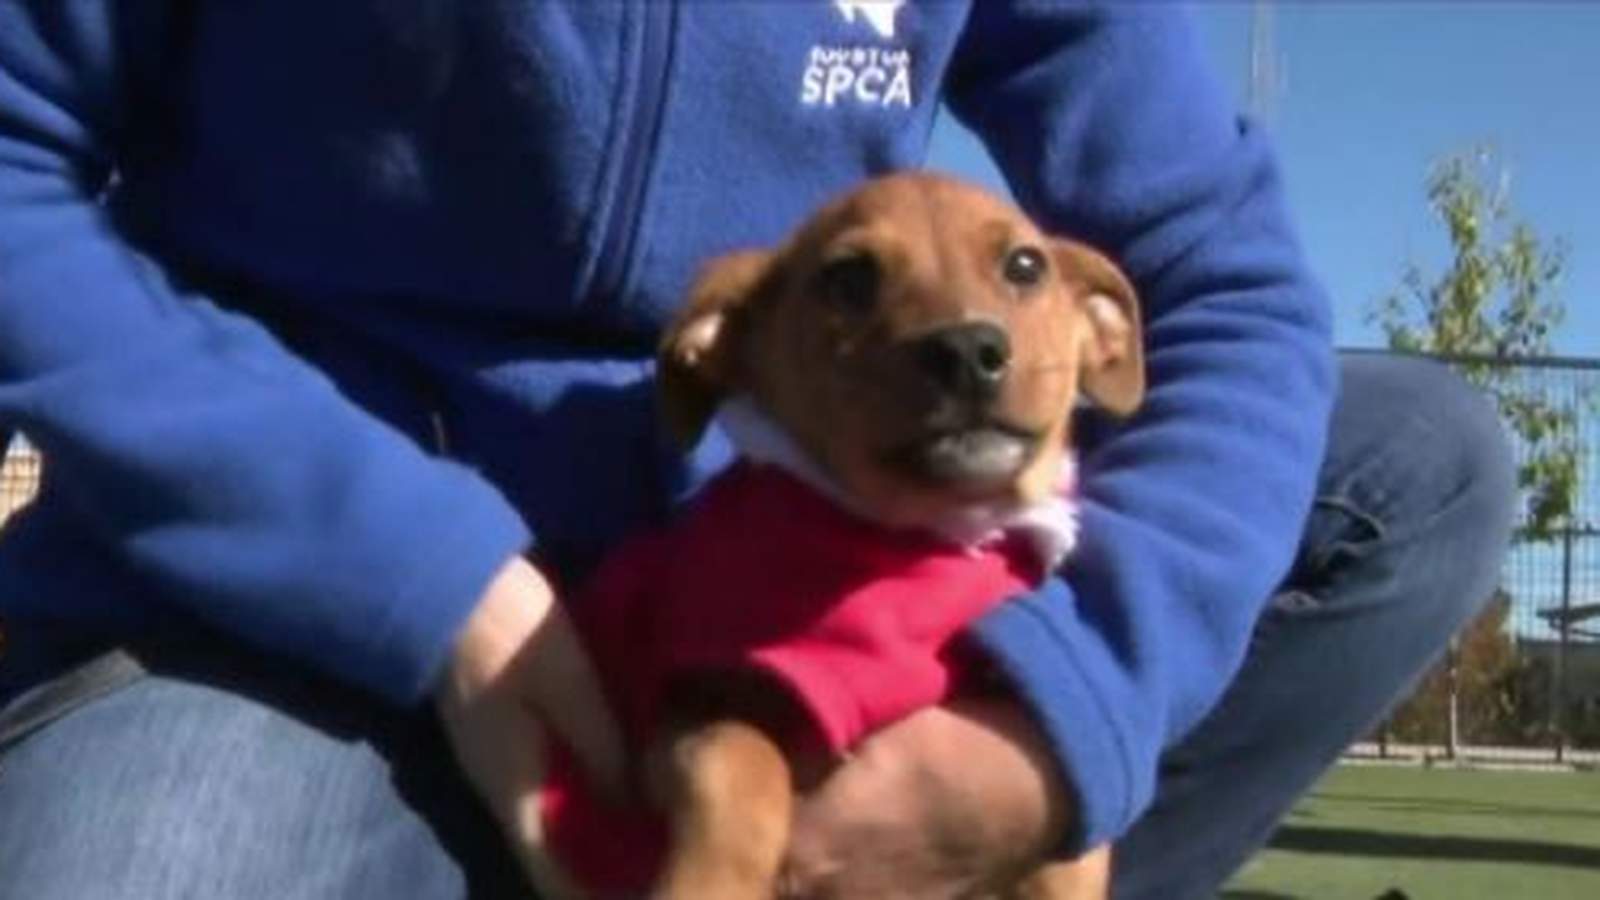 Houston SPCA urges people to prepare pets for freezing temps